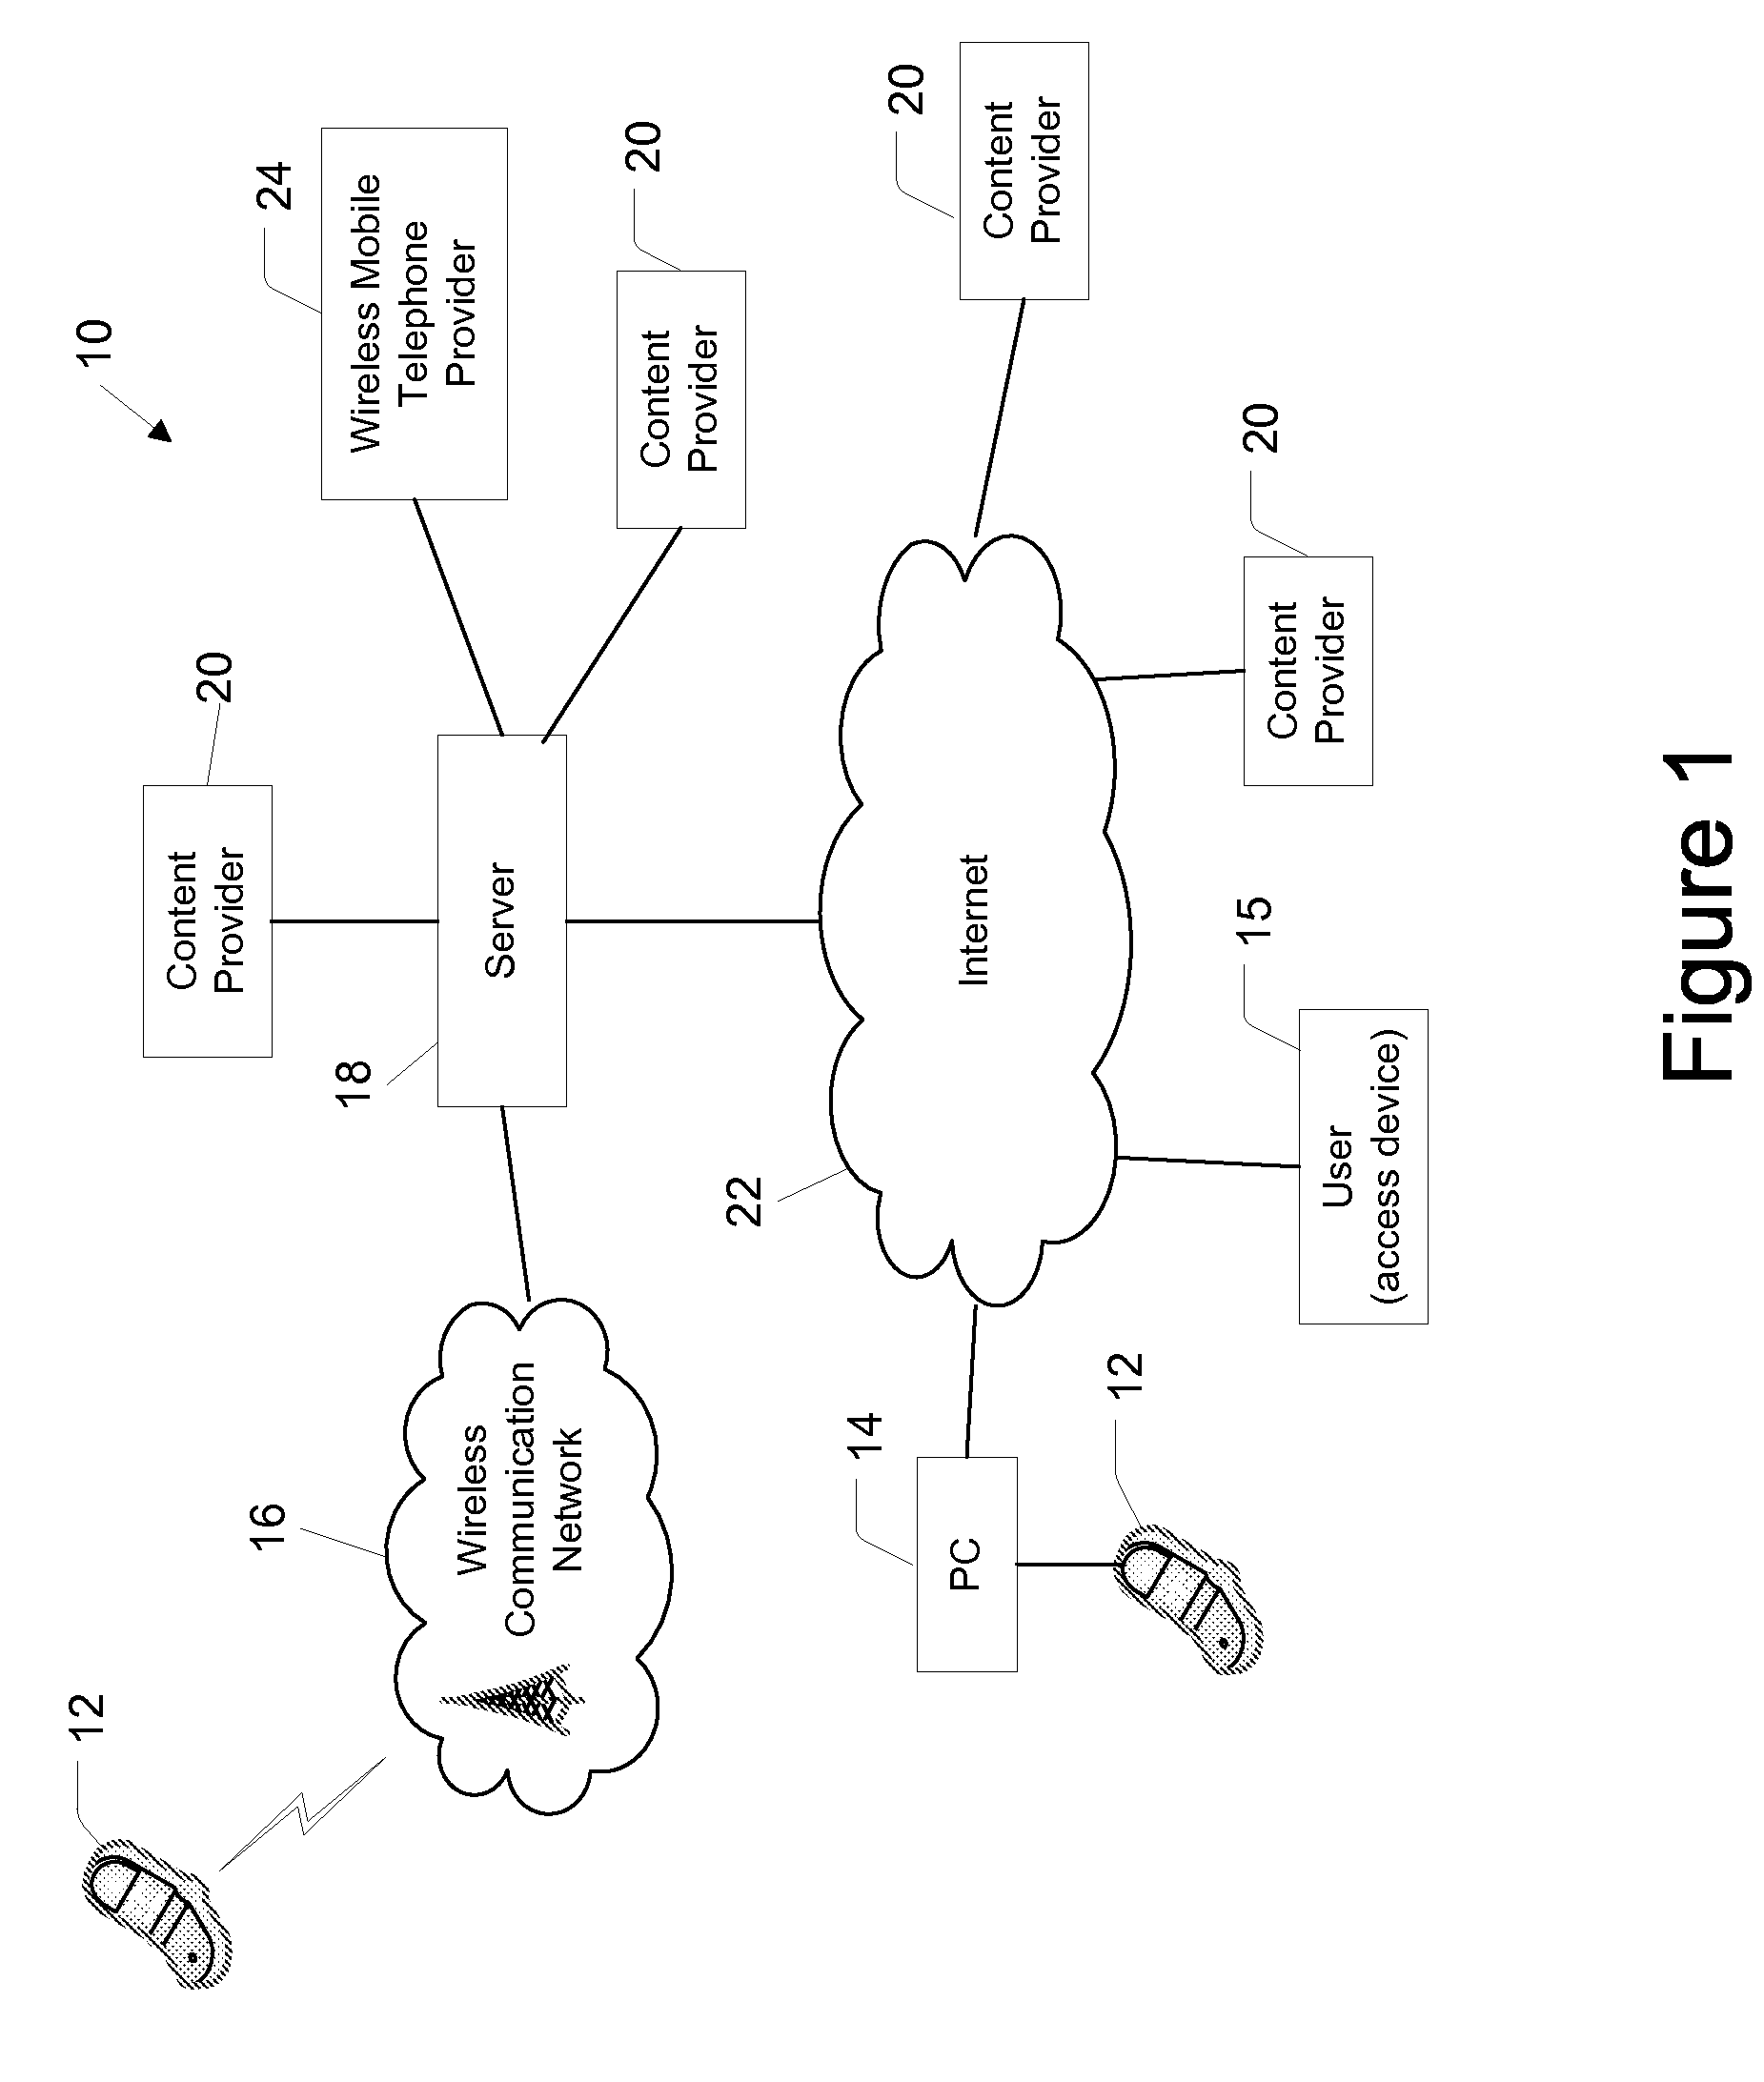 Content Delivery System and Method